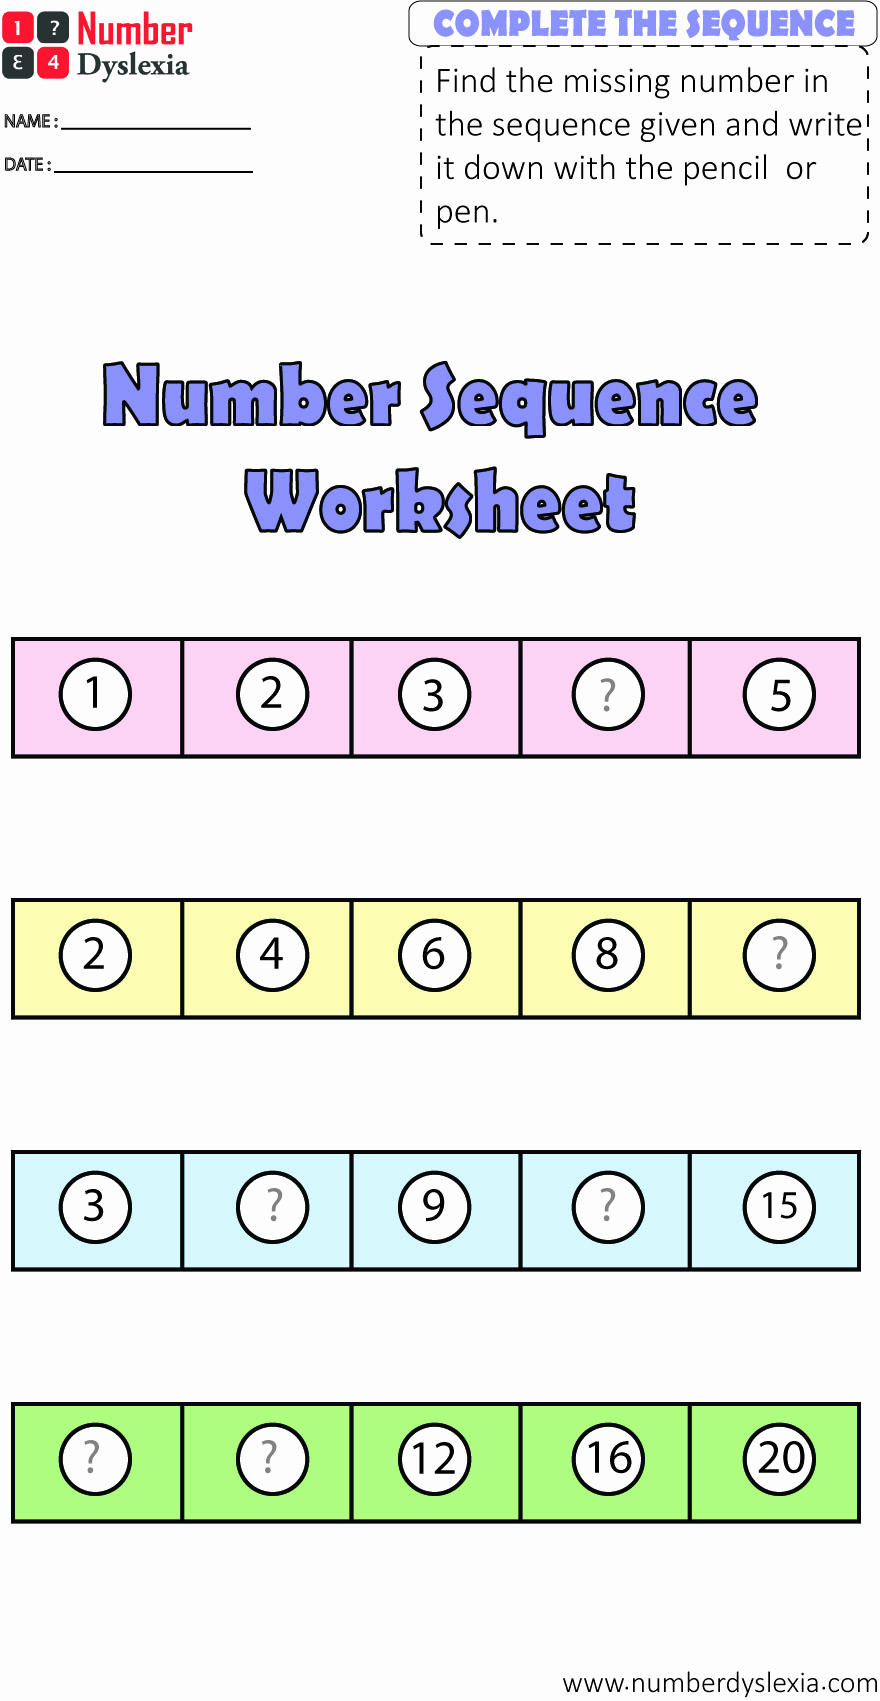 Sequencing Pictures Worksheets Unique Free Printable Number Sequencing Worksheets [pdf] Number